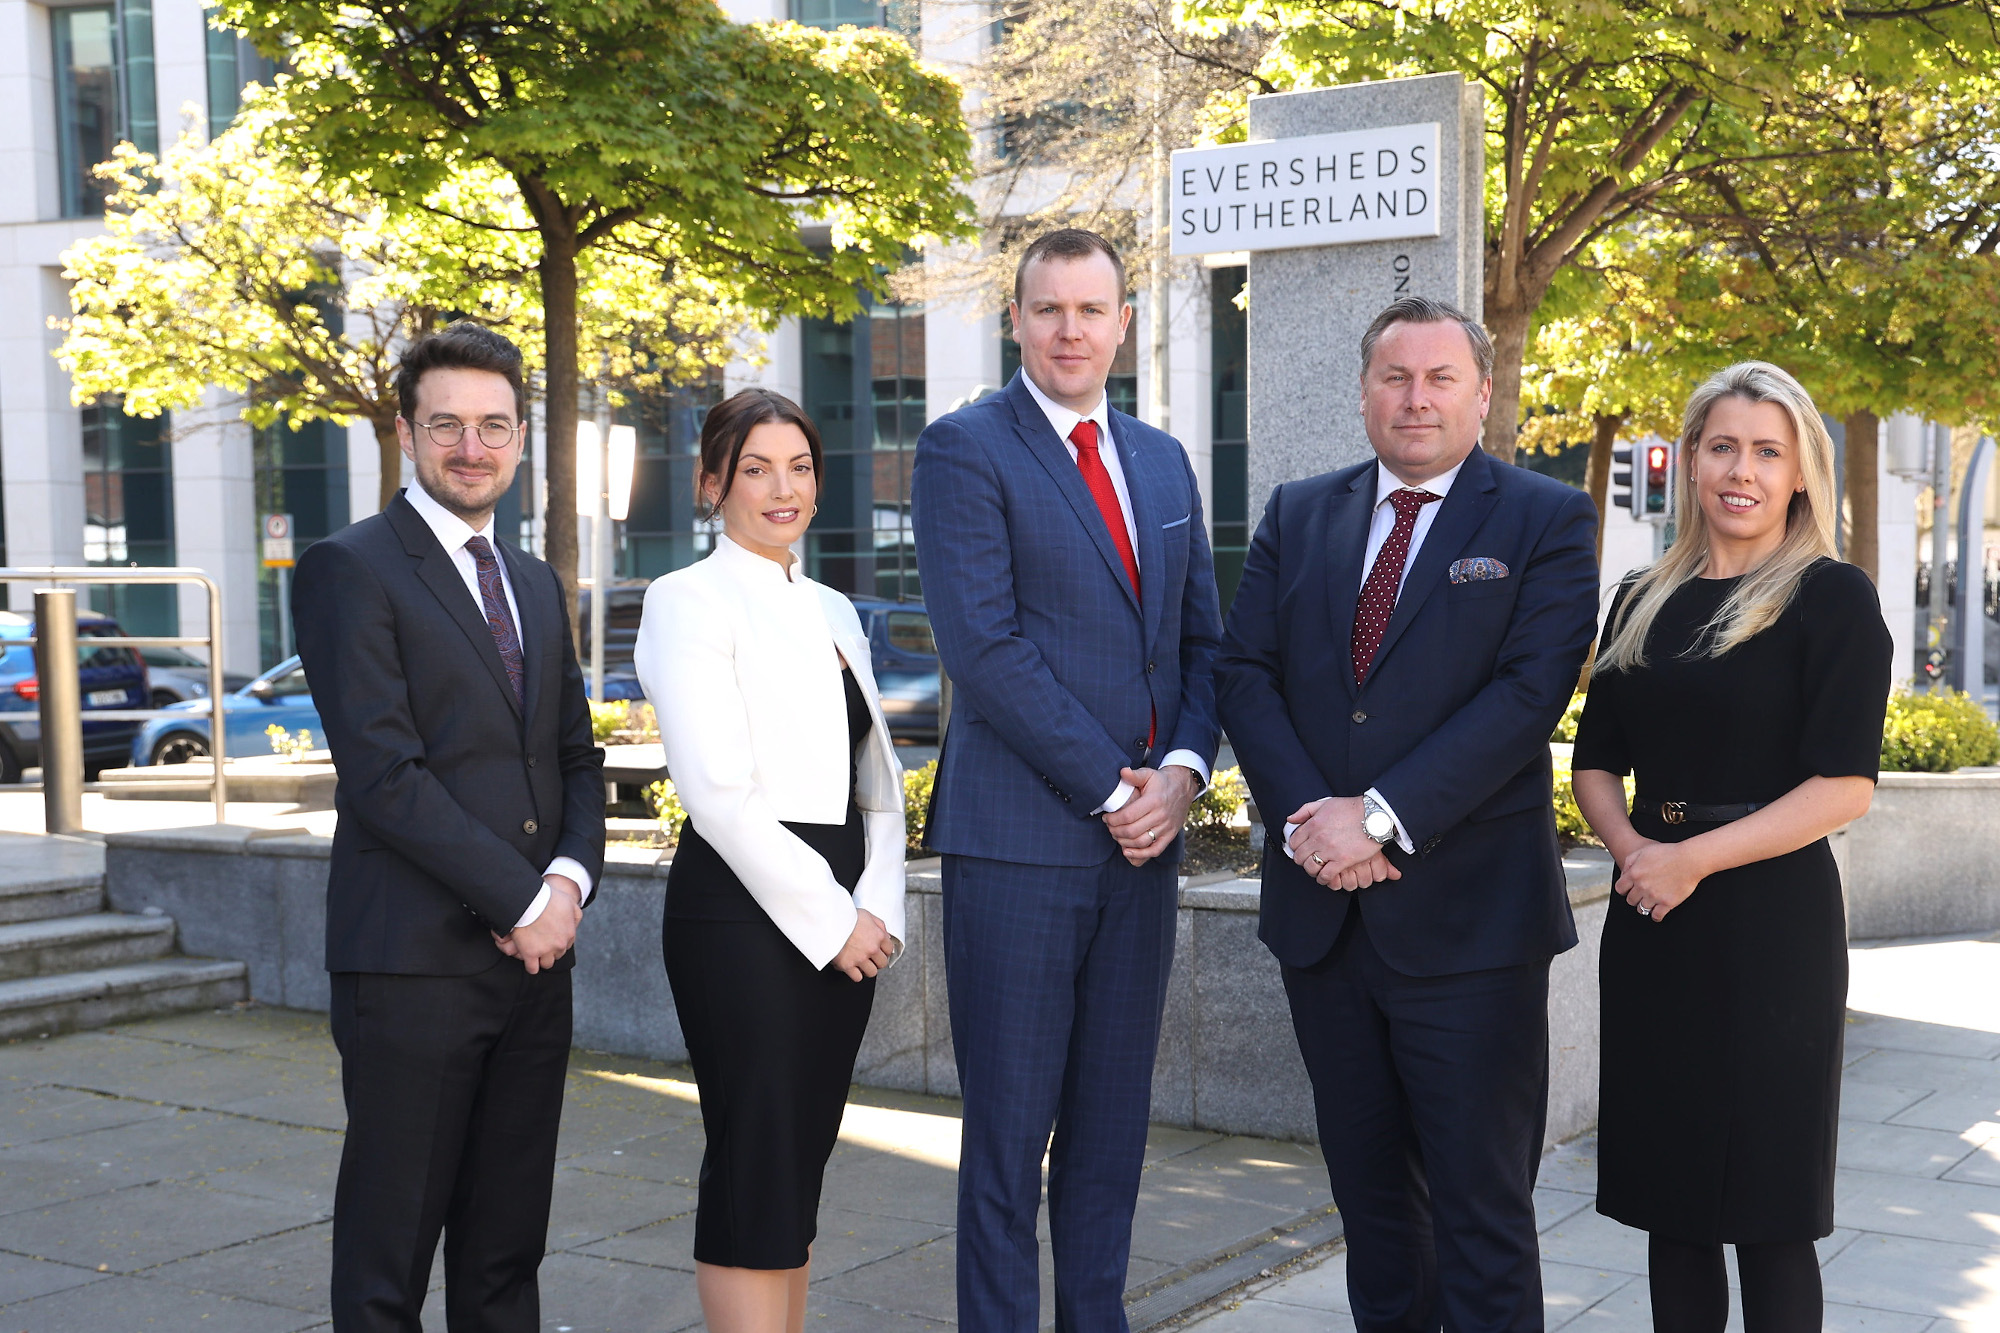 Eversheds Sutherland promotes four partners in Dublin